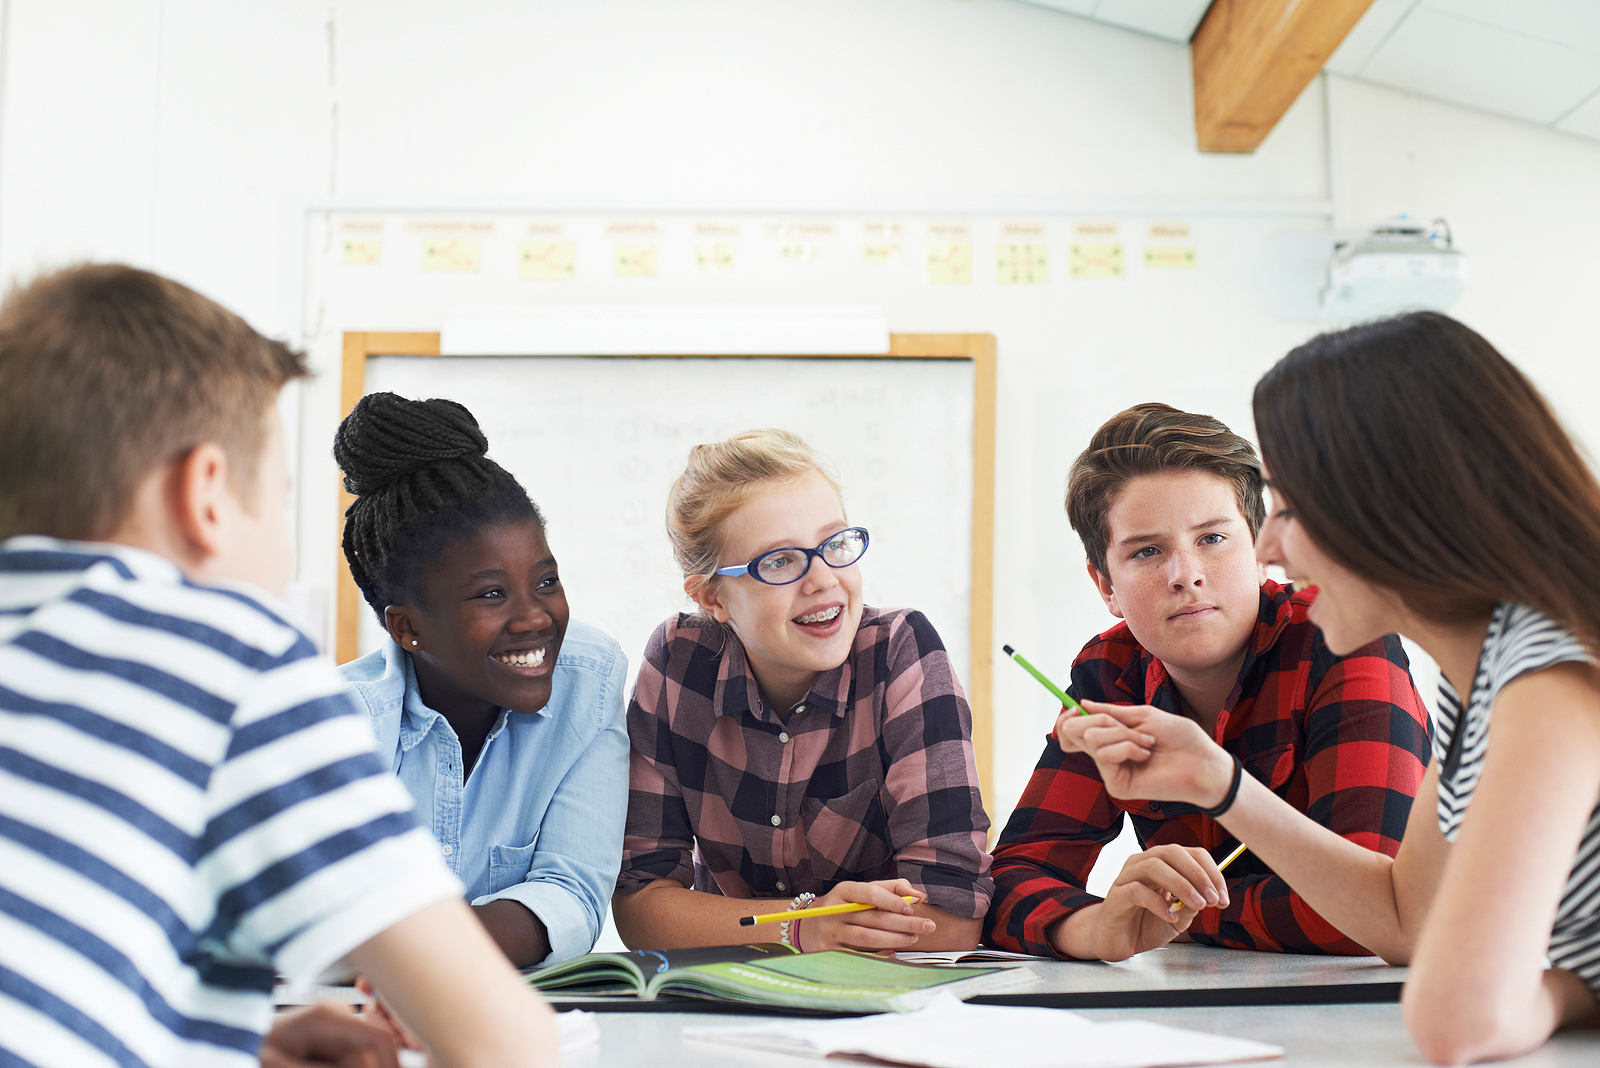 How to Improve Mathematical Discourse in the Classroom